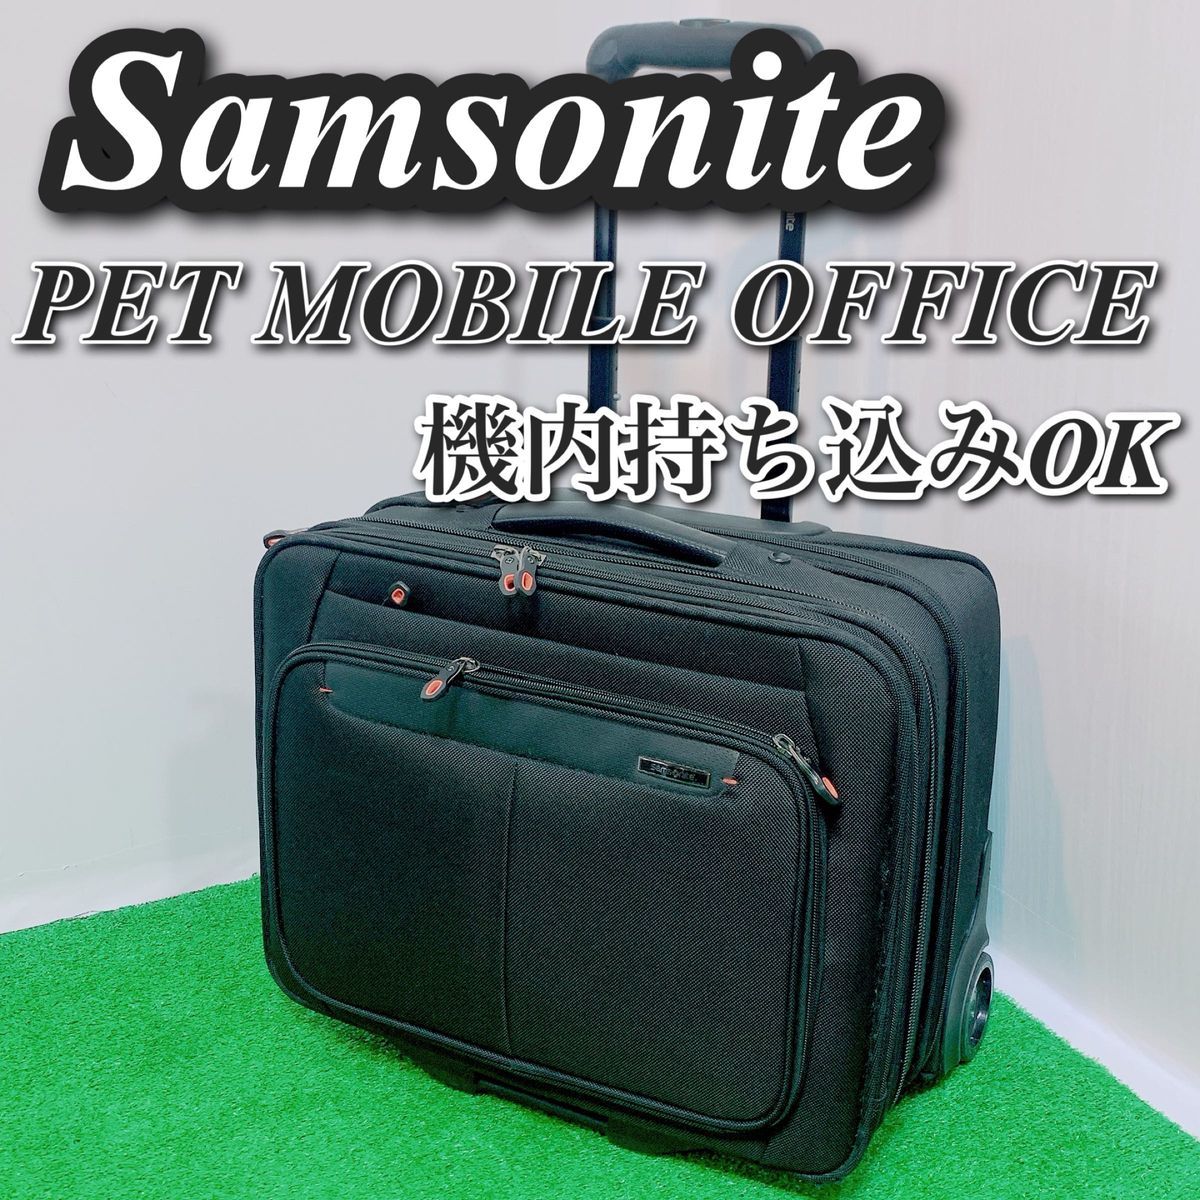  Samsonite Carry case suitcase Samsonite carry bag machine inside bringing in A4 1.2. business beautiful goods use frequency little 